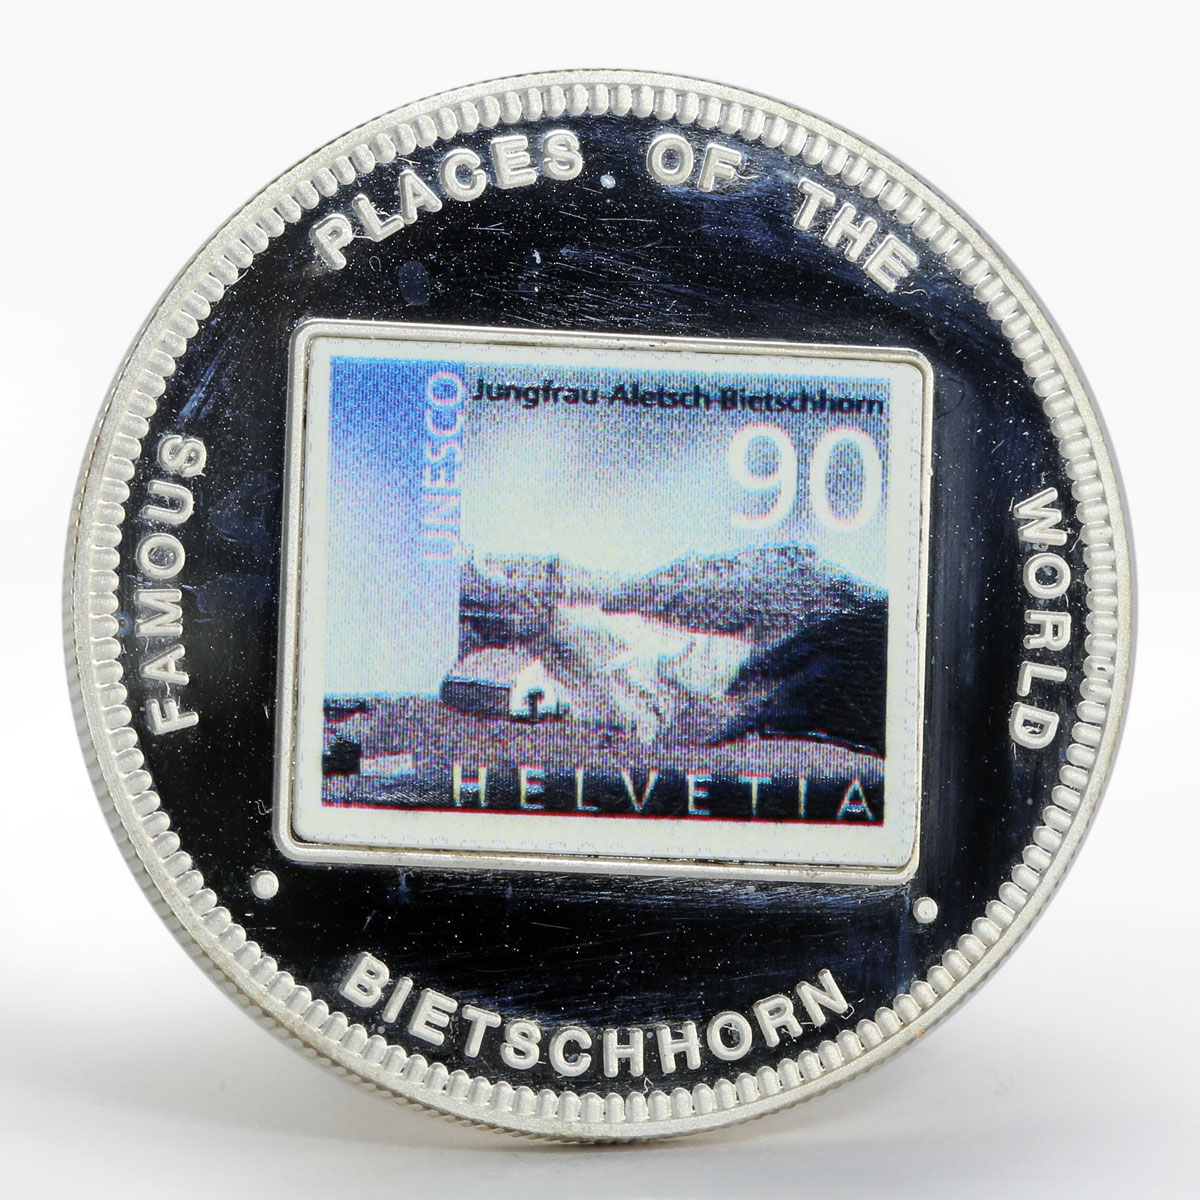 Malawi 10 kwacha Famous Places Bietschhorn stamp colored silver proof 2004